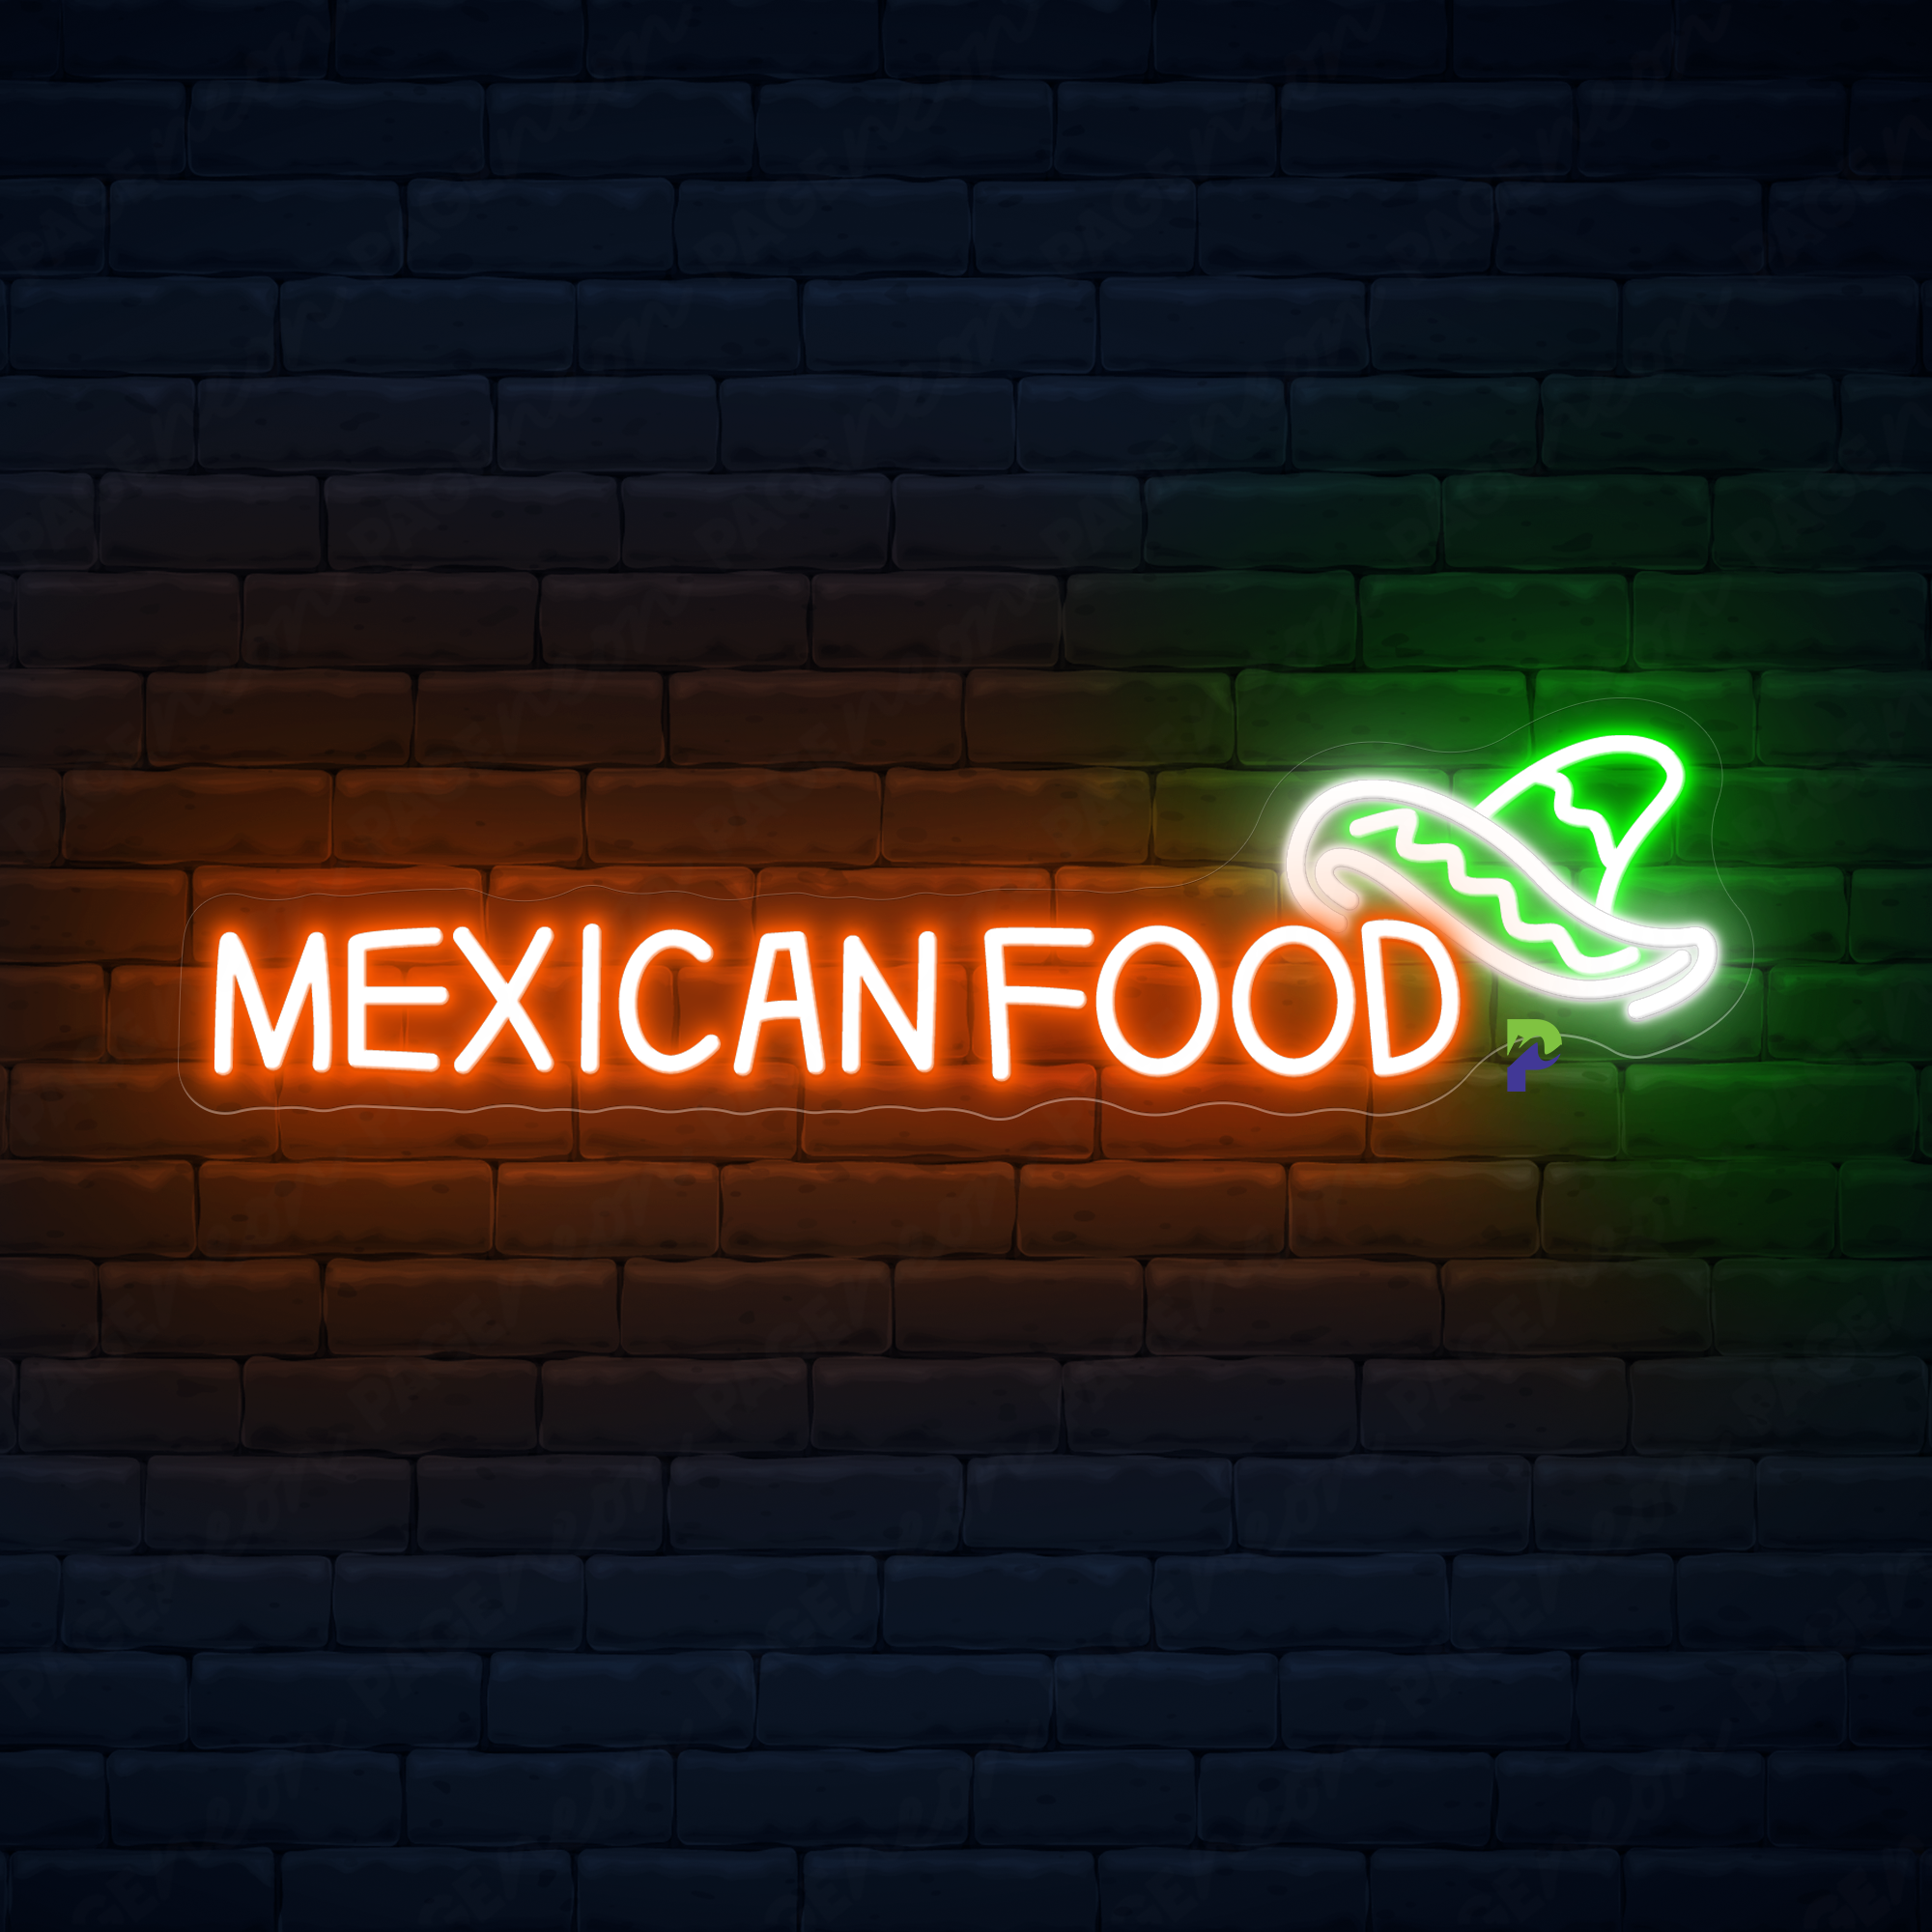 Mexican Food Neon Sign Restaurant Led Light